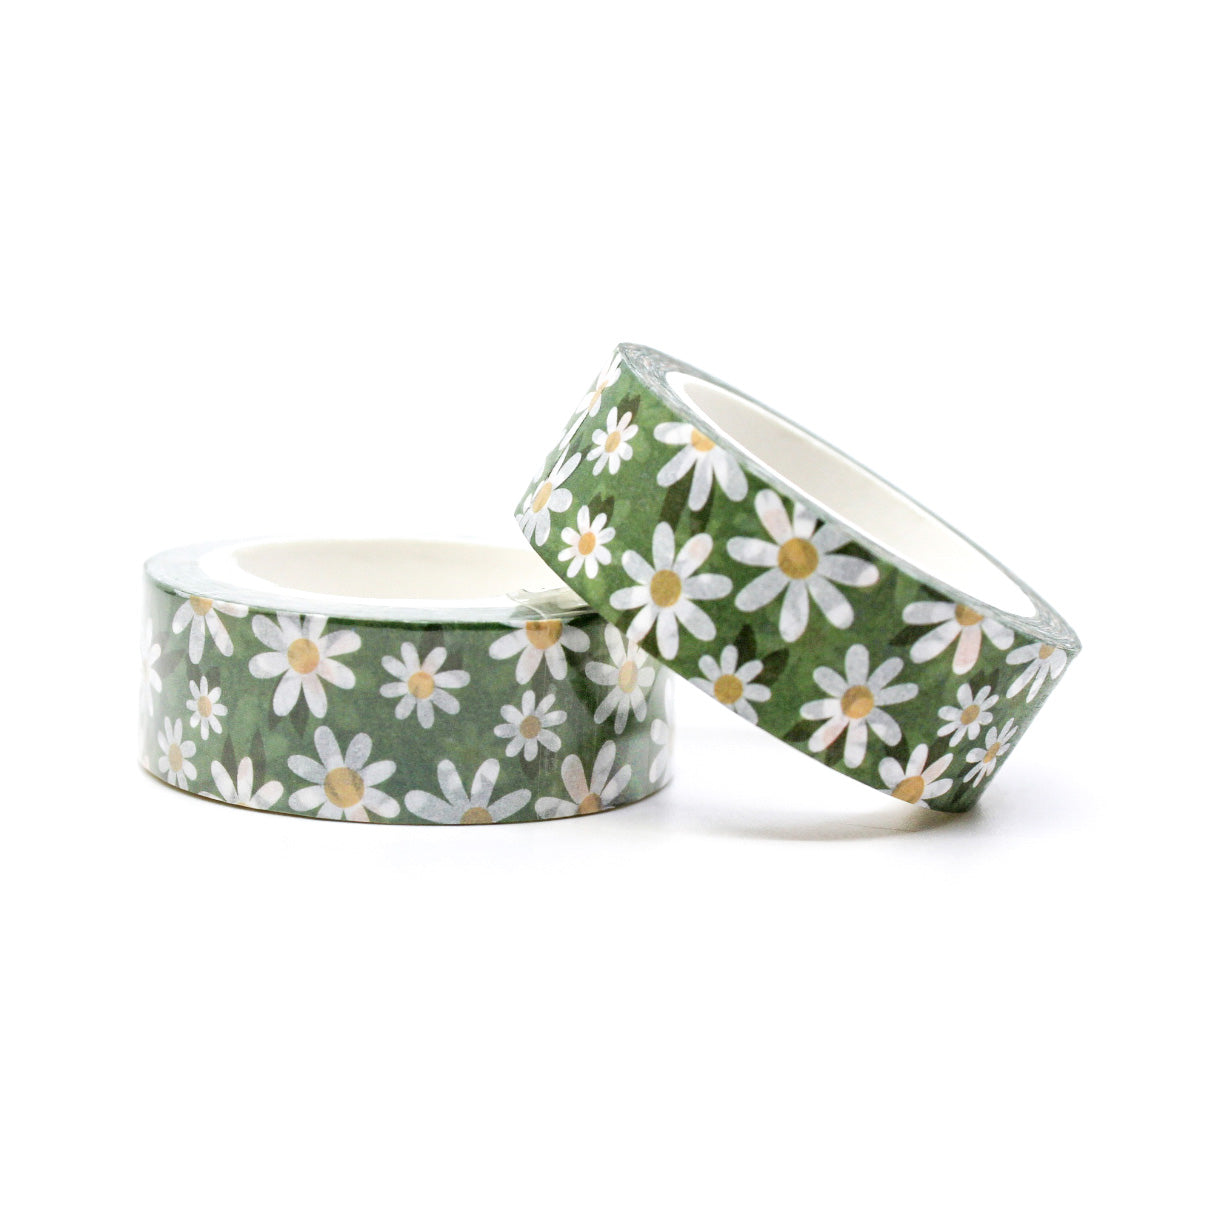 Green Daisy Flower Washi Tape: This washi tape features a beautiful green daisy flower pattern, adding a touch of nature's beauty to your crafts and projects. This tape is sold at BBB Supplies Craft Shop.